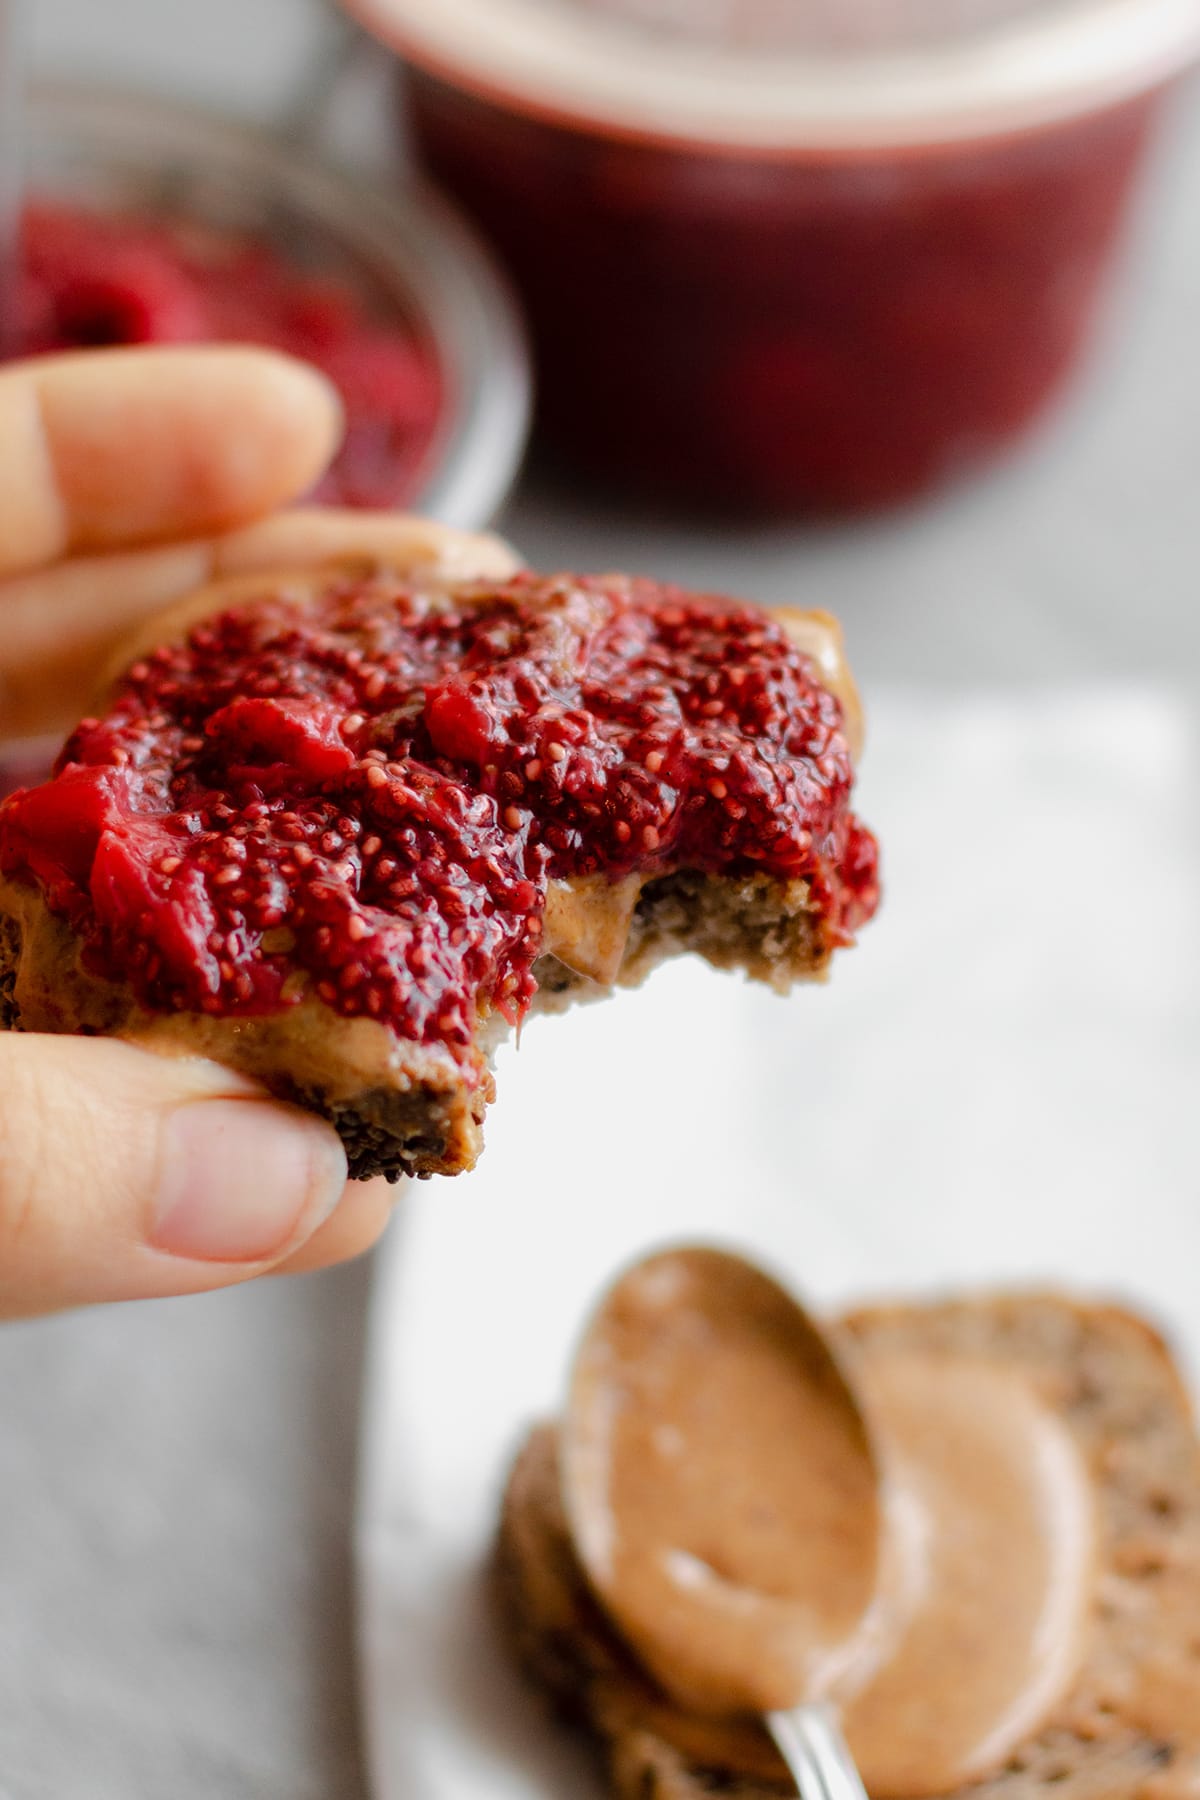 A hand holding a toast with peanut butter and chia jam.